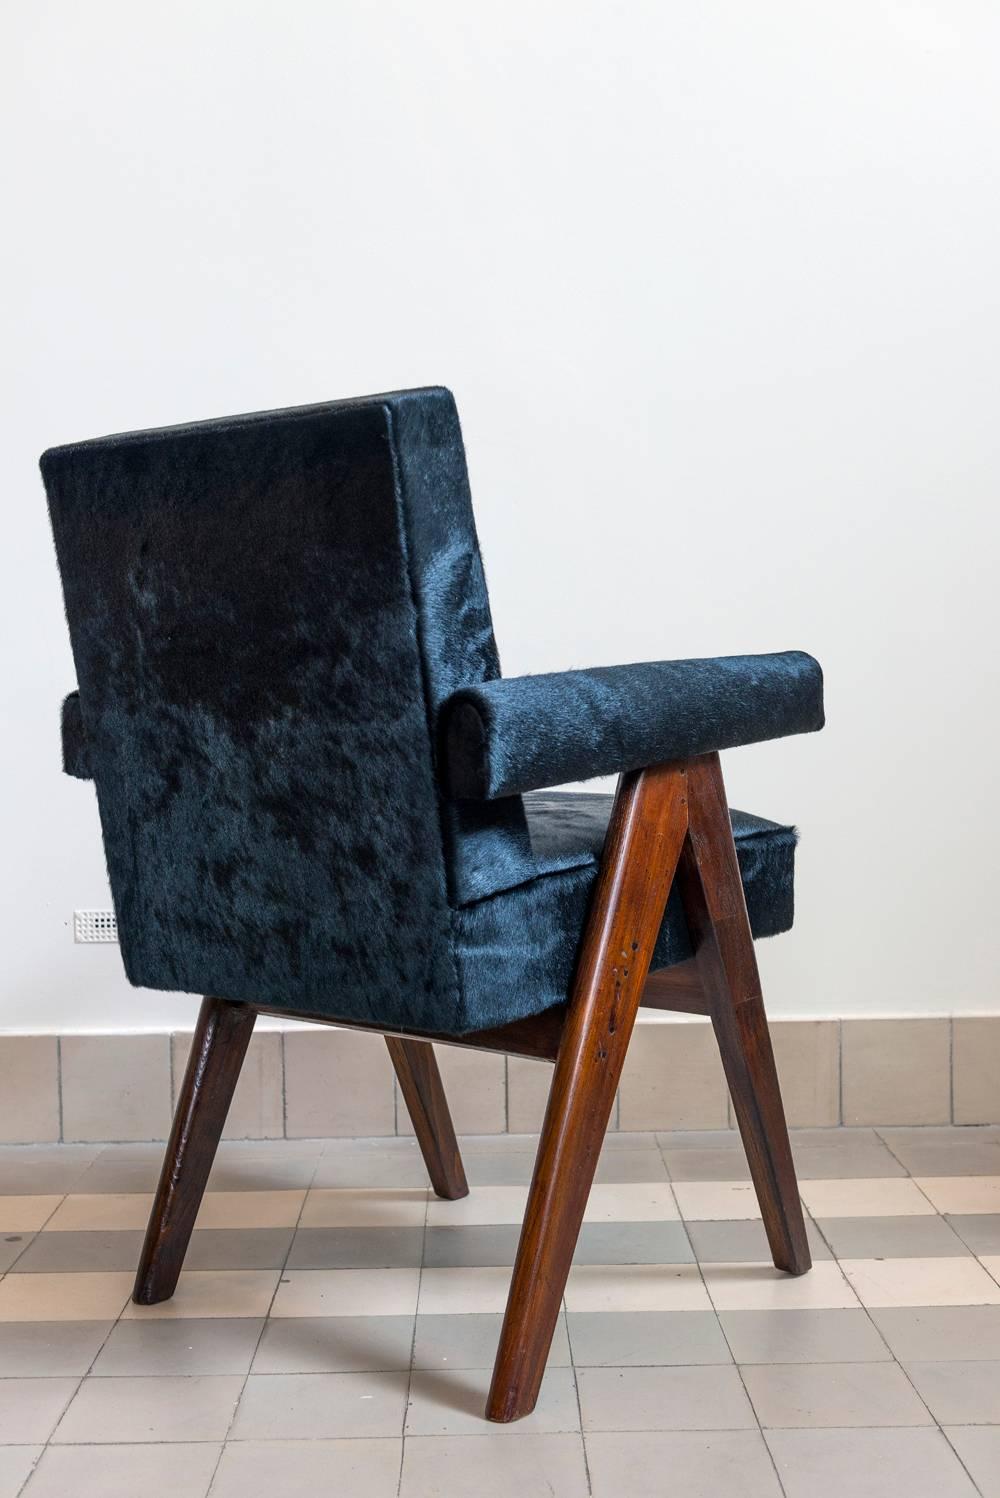 Indian Pierre Jeanneret, PJ-SI-30-A, Committee Armchair, Chandigarh, circa 1953